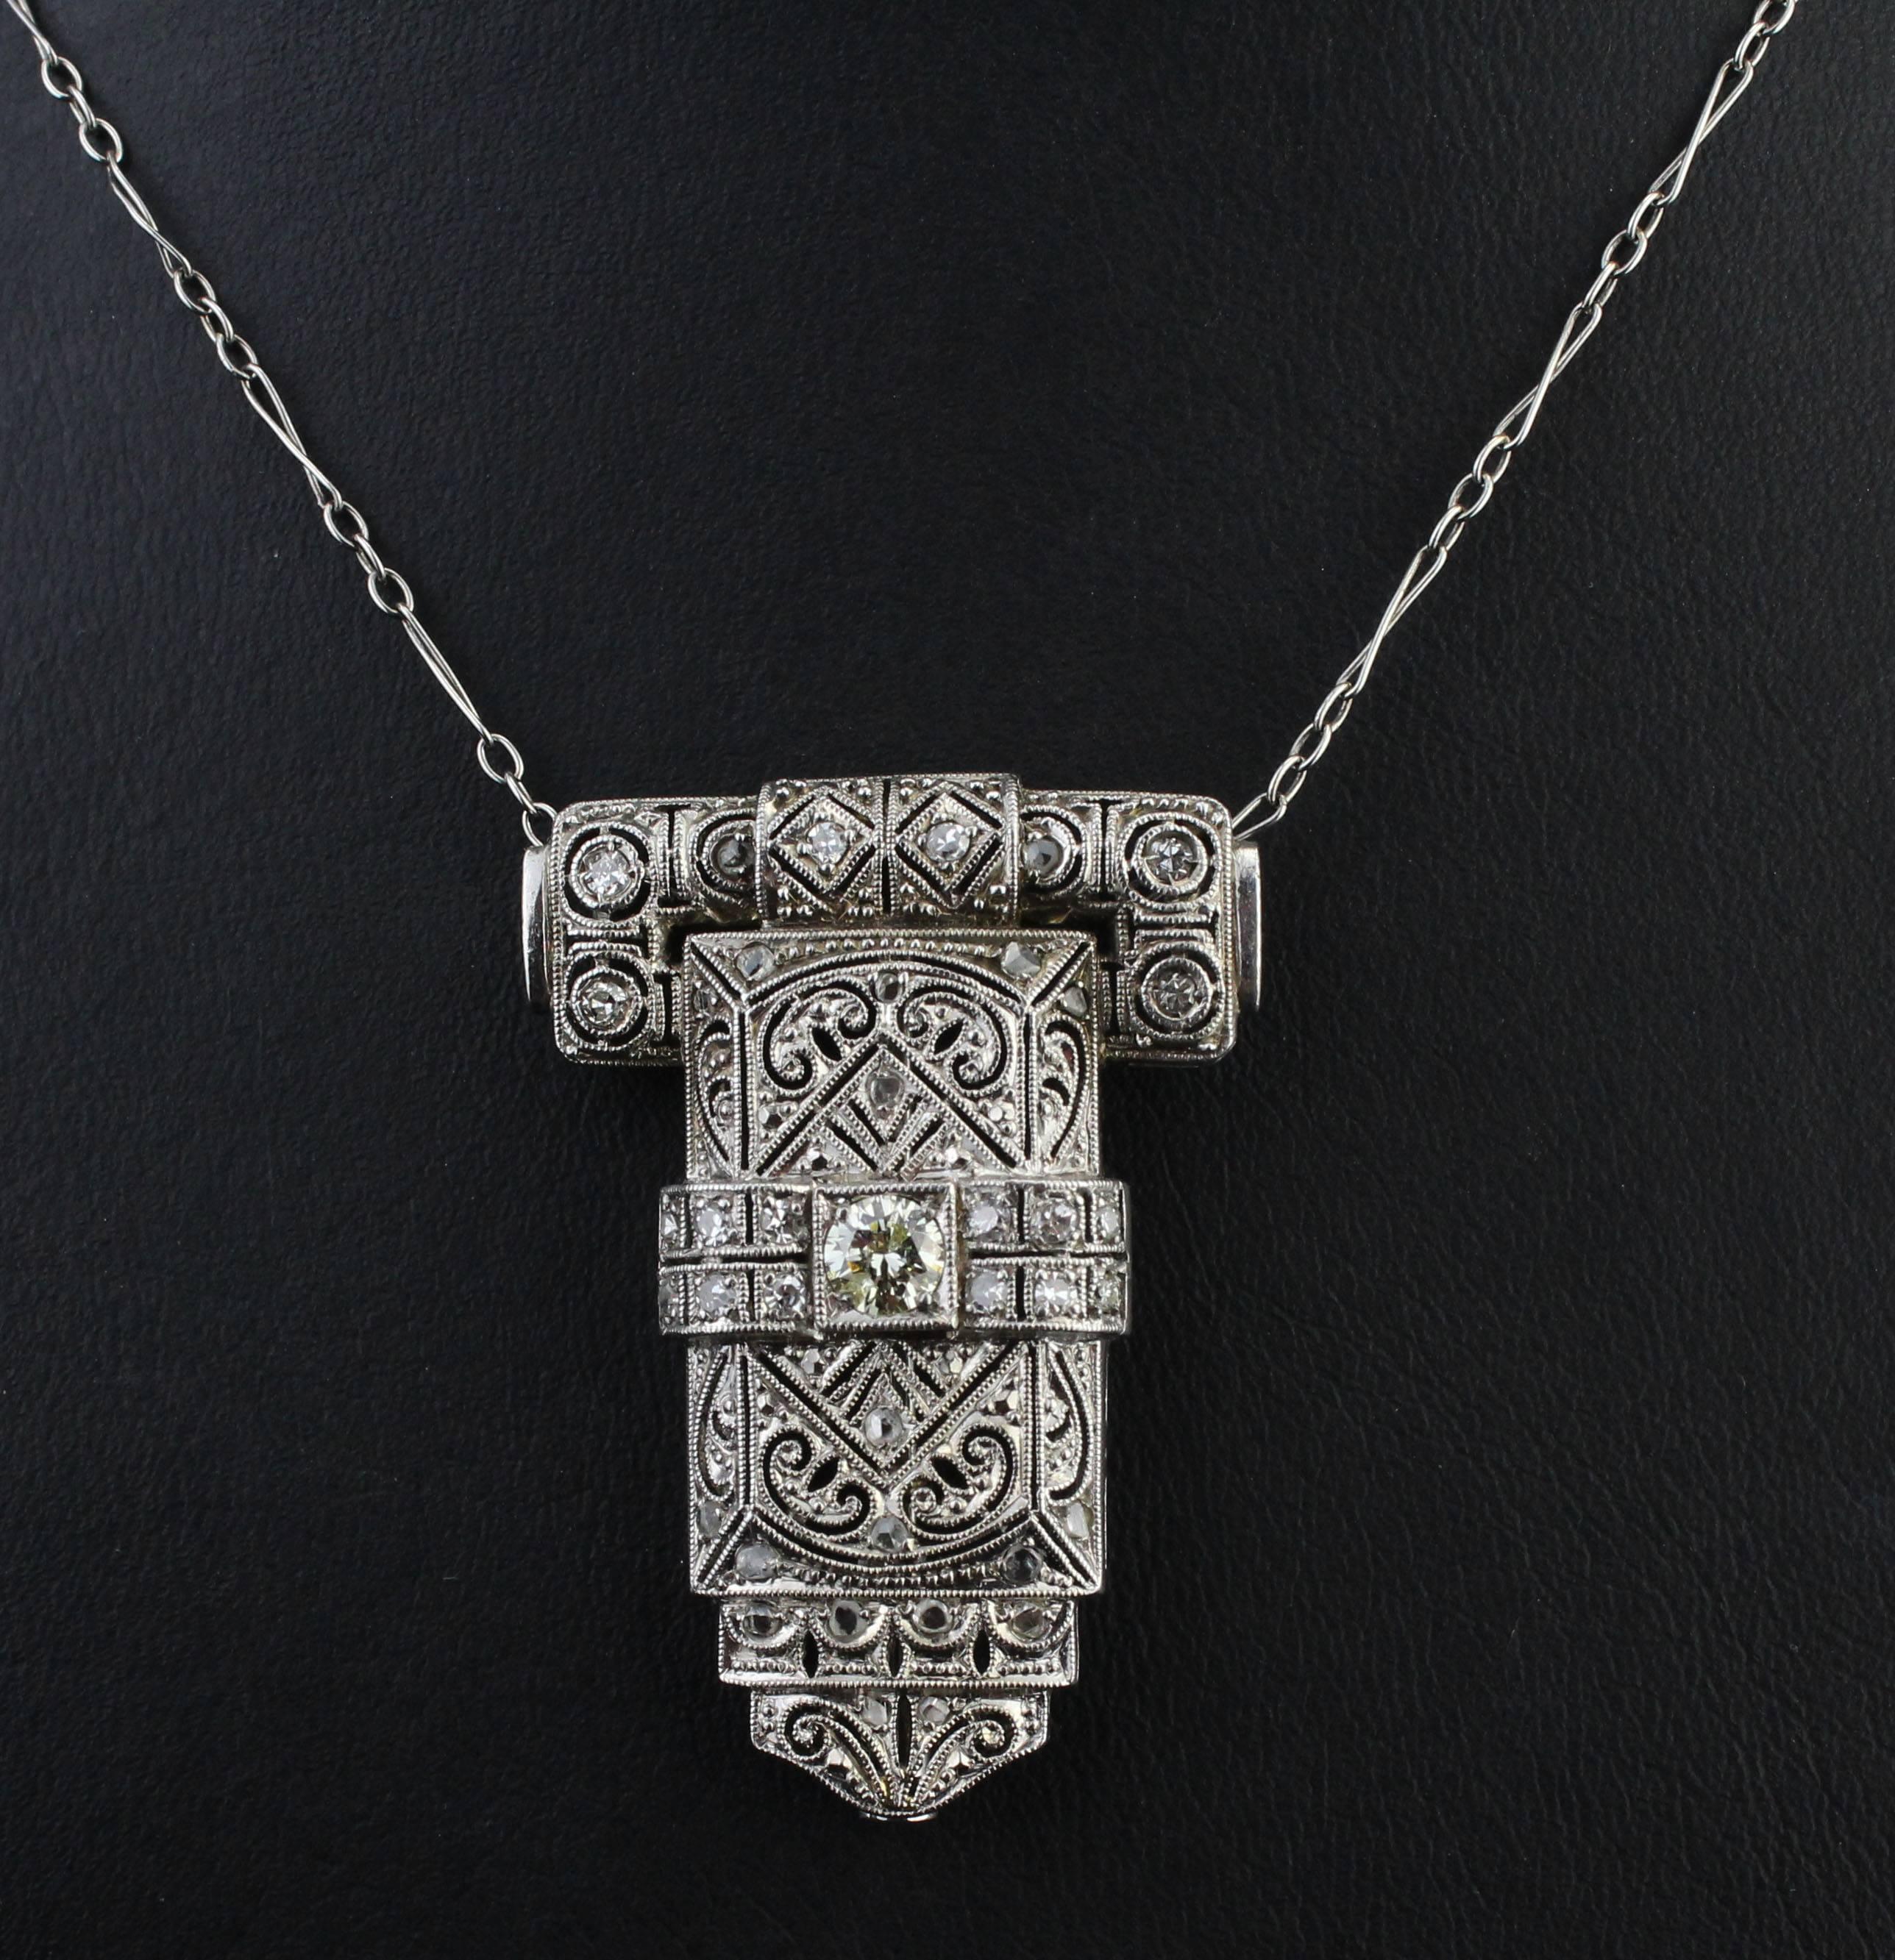 Art Deco,  circa 1920/1930.
Platinum.
Pendant with brilliants. 
Pendant measures: Height 3.5 cm, width 3 cm, depth 0.6 cm.
Length of necklace: 39 cm.

I provide for packing of the goods. So no need to worry about damages, scratches etc.